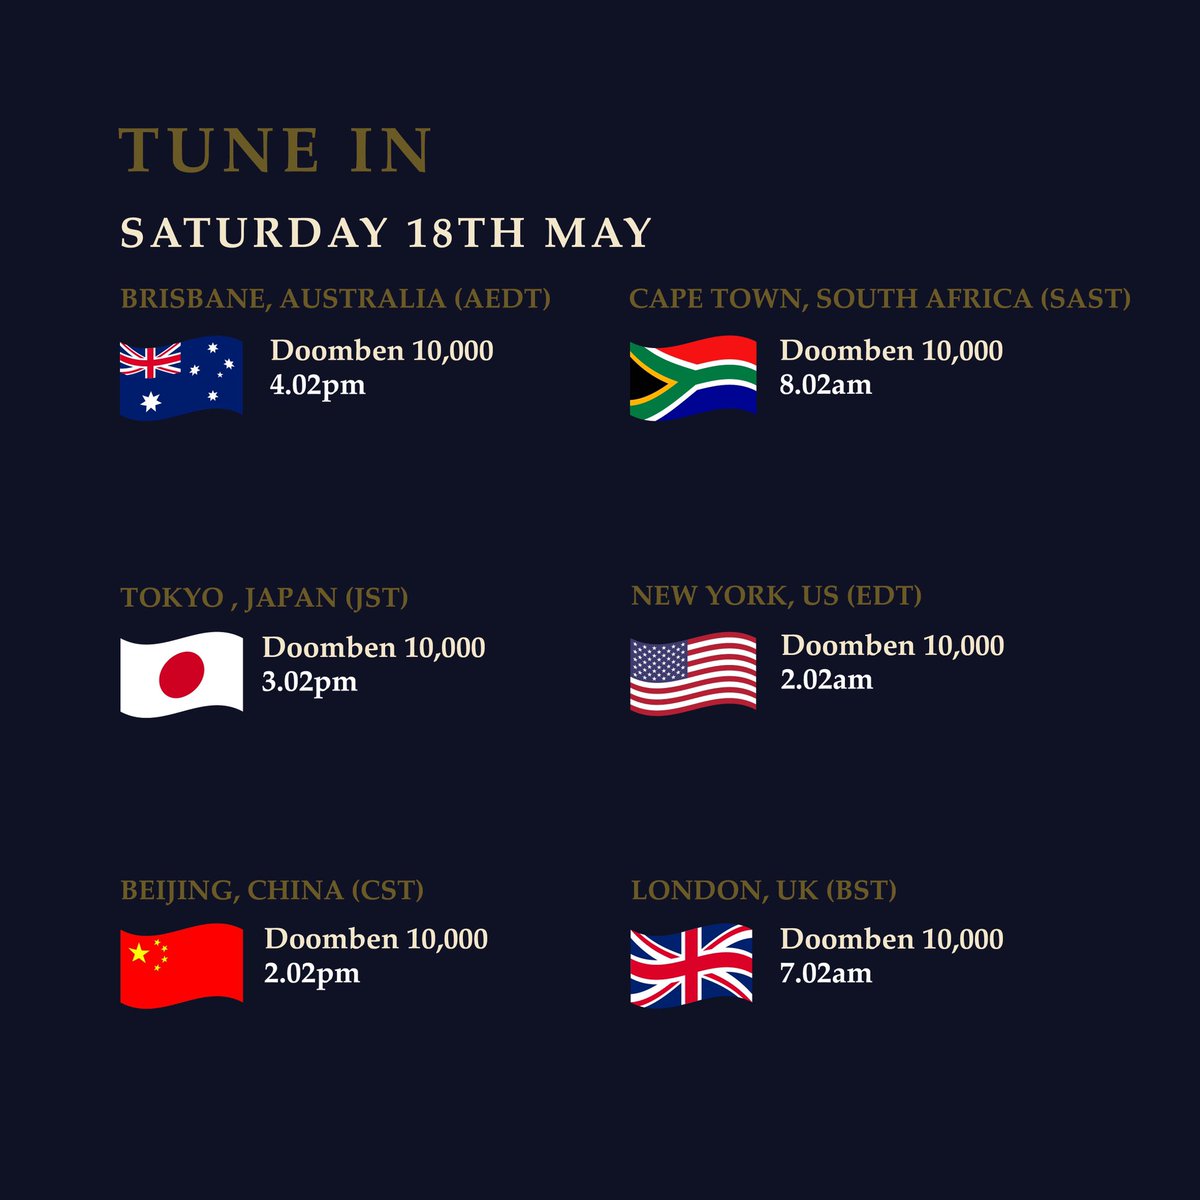 Get ready for another busy weekend of racing in Australia with the Group One Doomben 10,000 kicking off the Queensland Racing Carnival. In NSW, the Horse Capital of Australia, Scone, hosts its exclusive stand-alone meeting on Saturday when city racing heads to the country as part